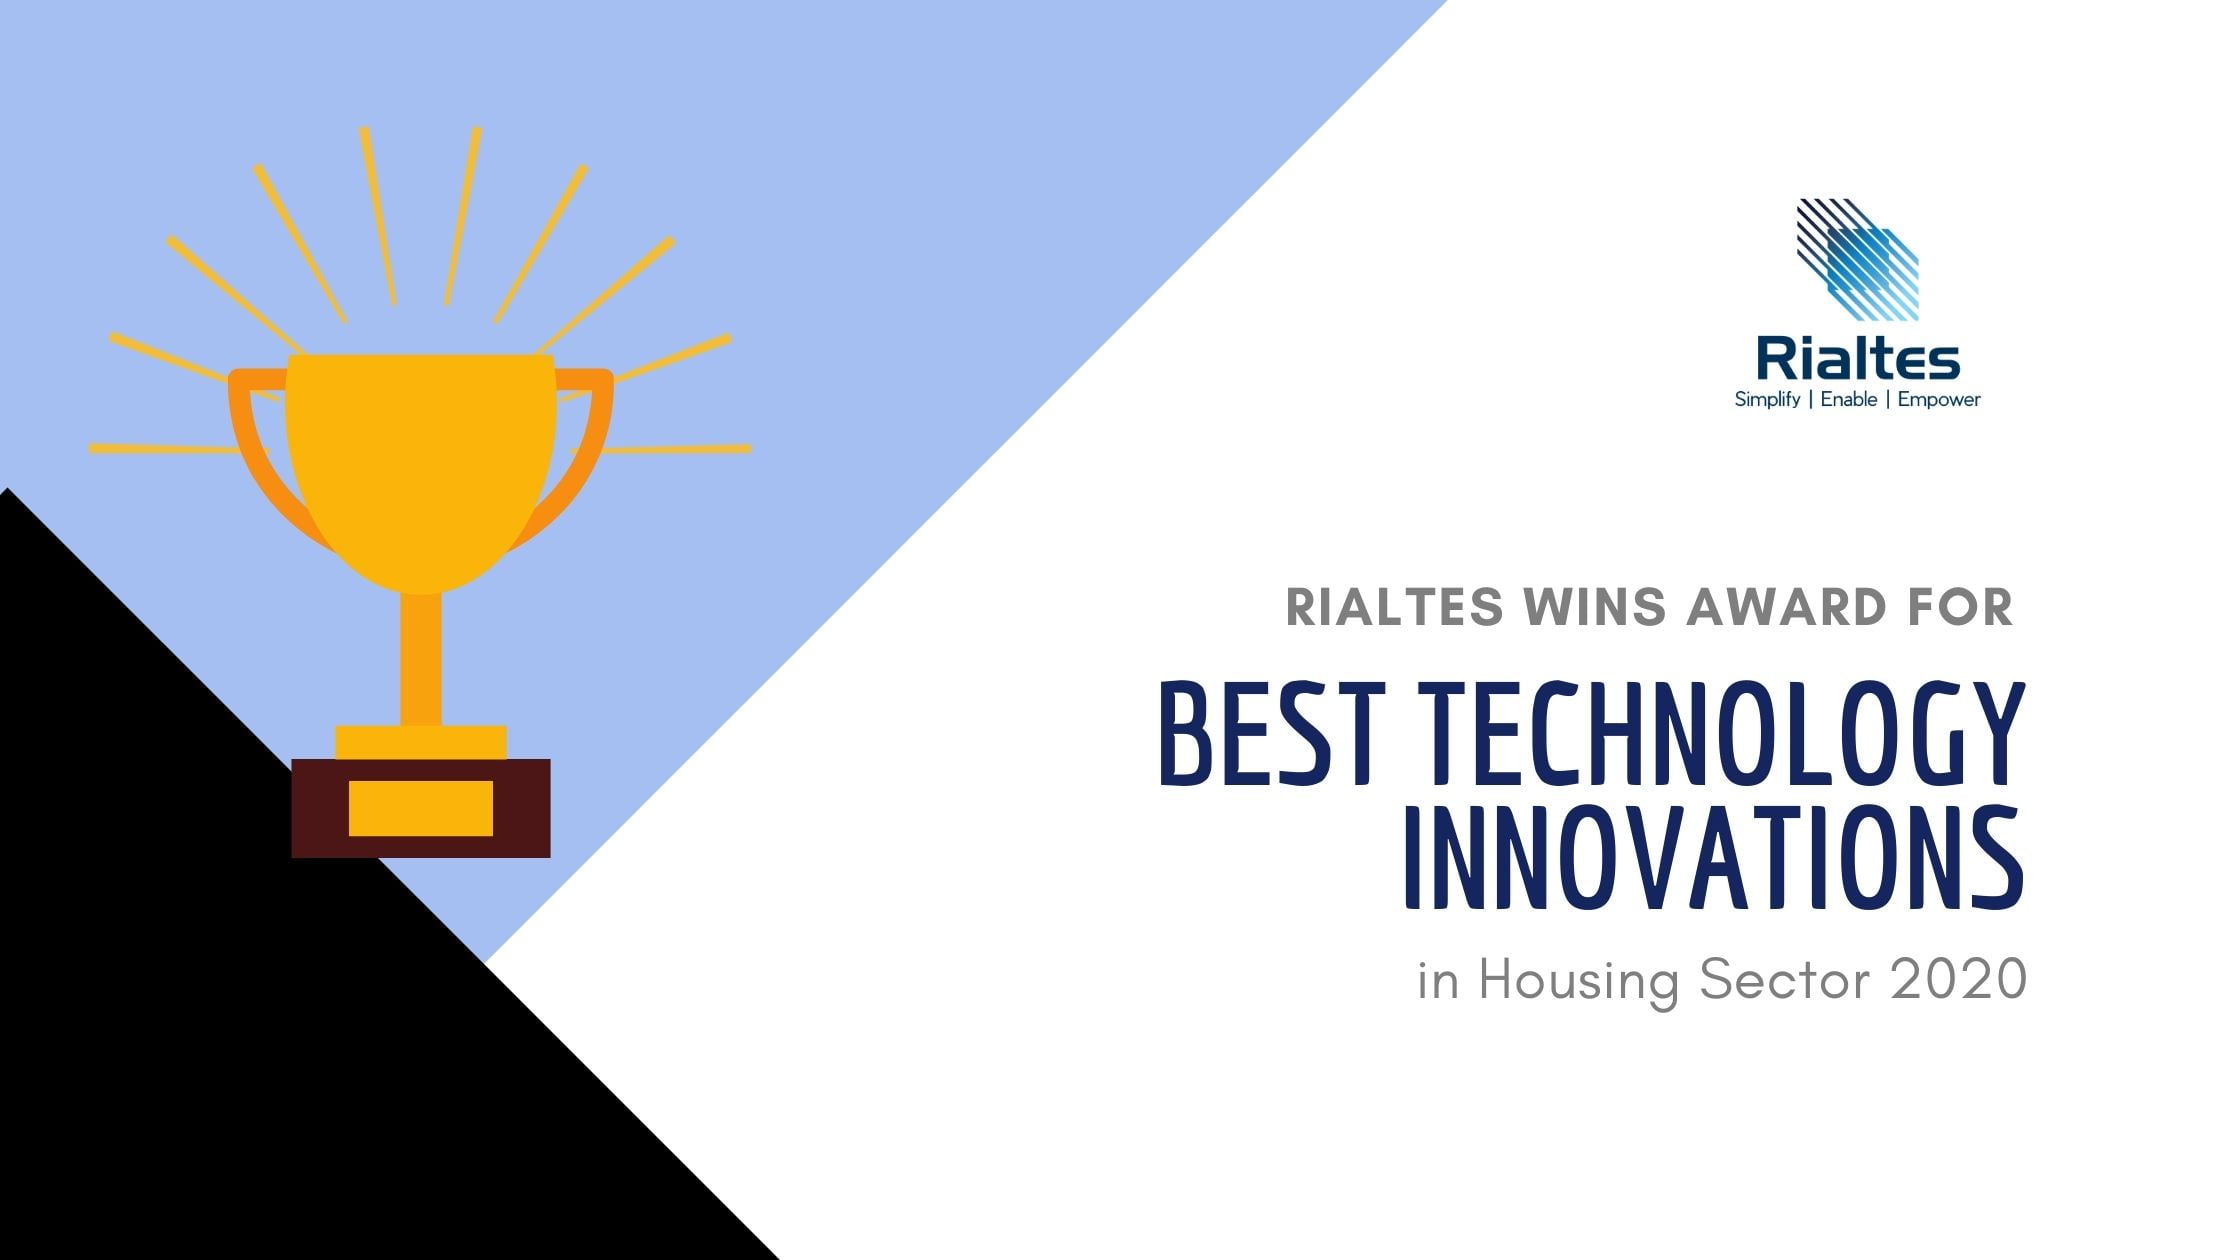 Rialtes awarded for Best Technology Innovations in Housing Sector